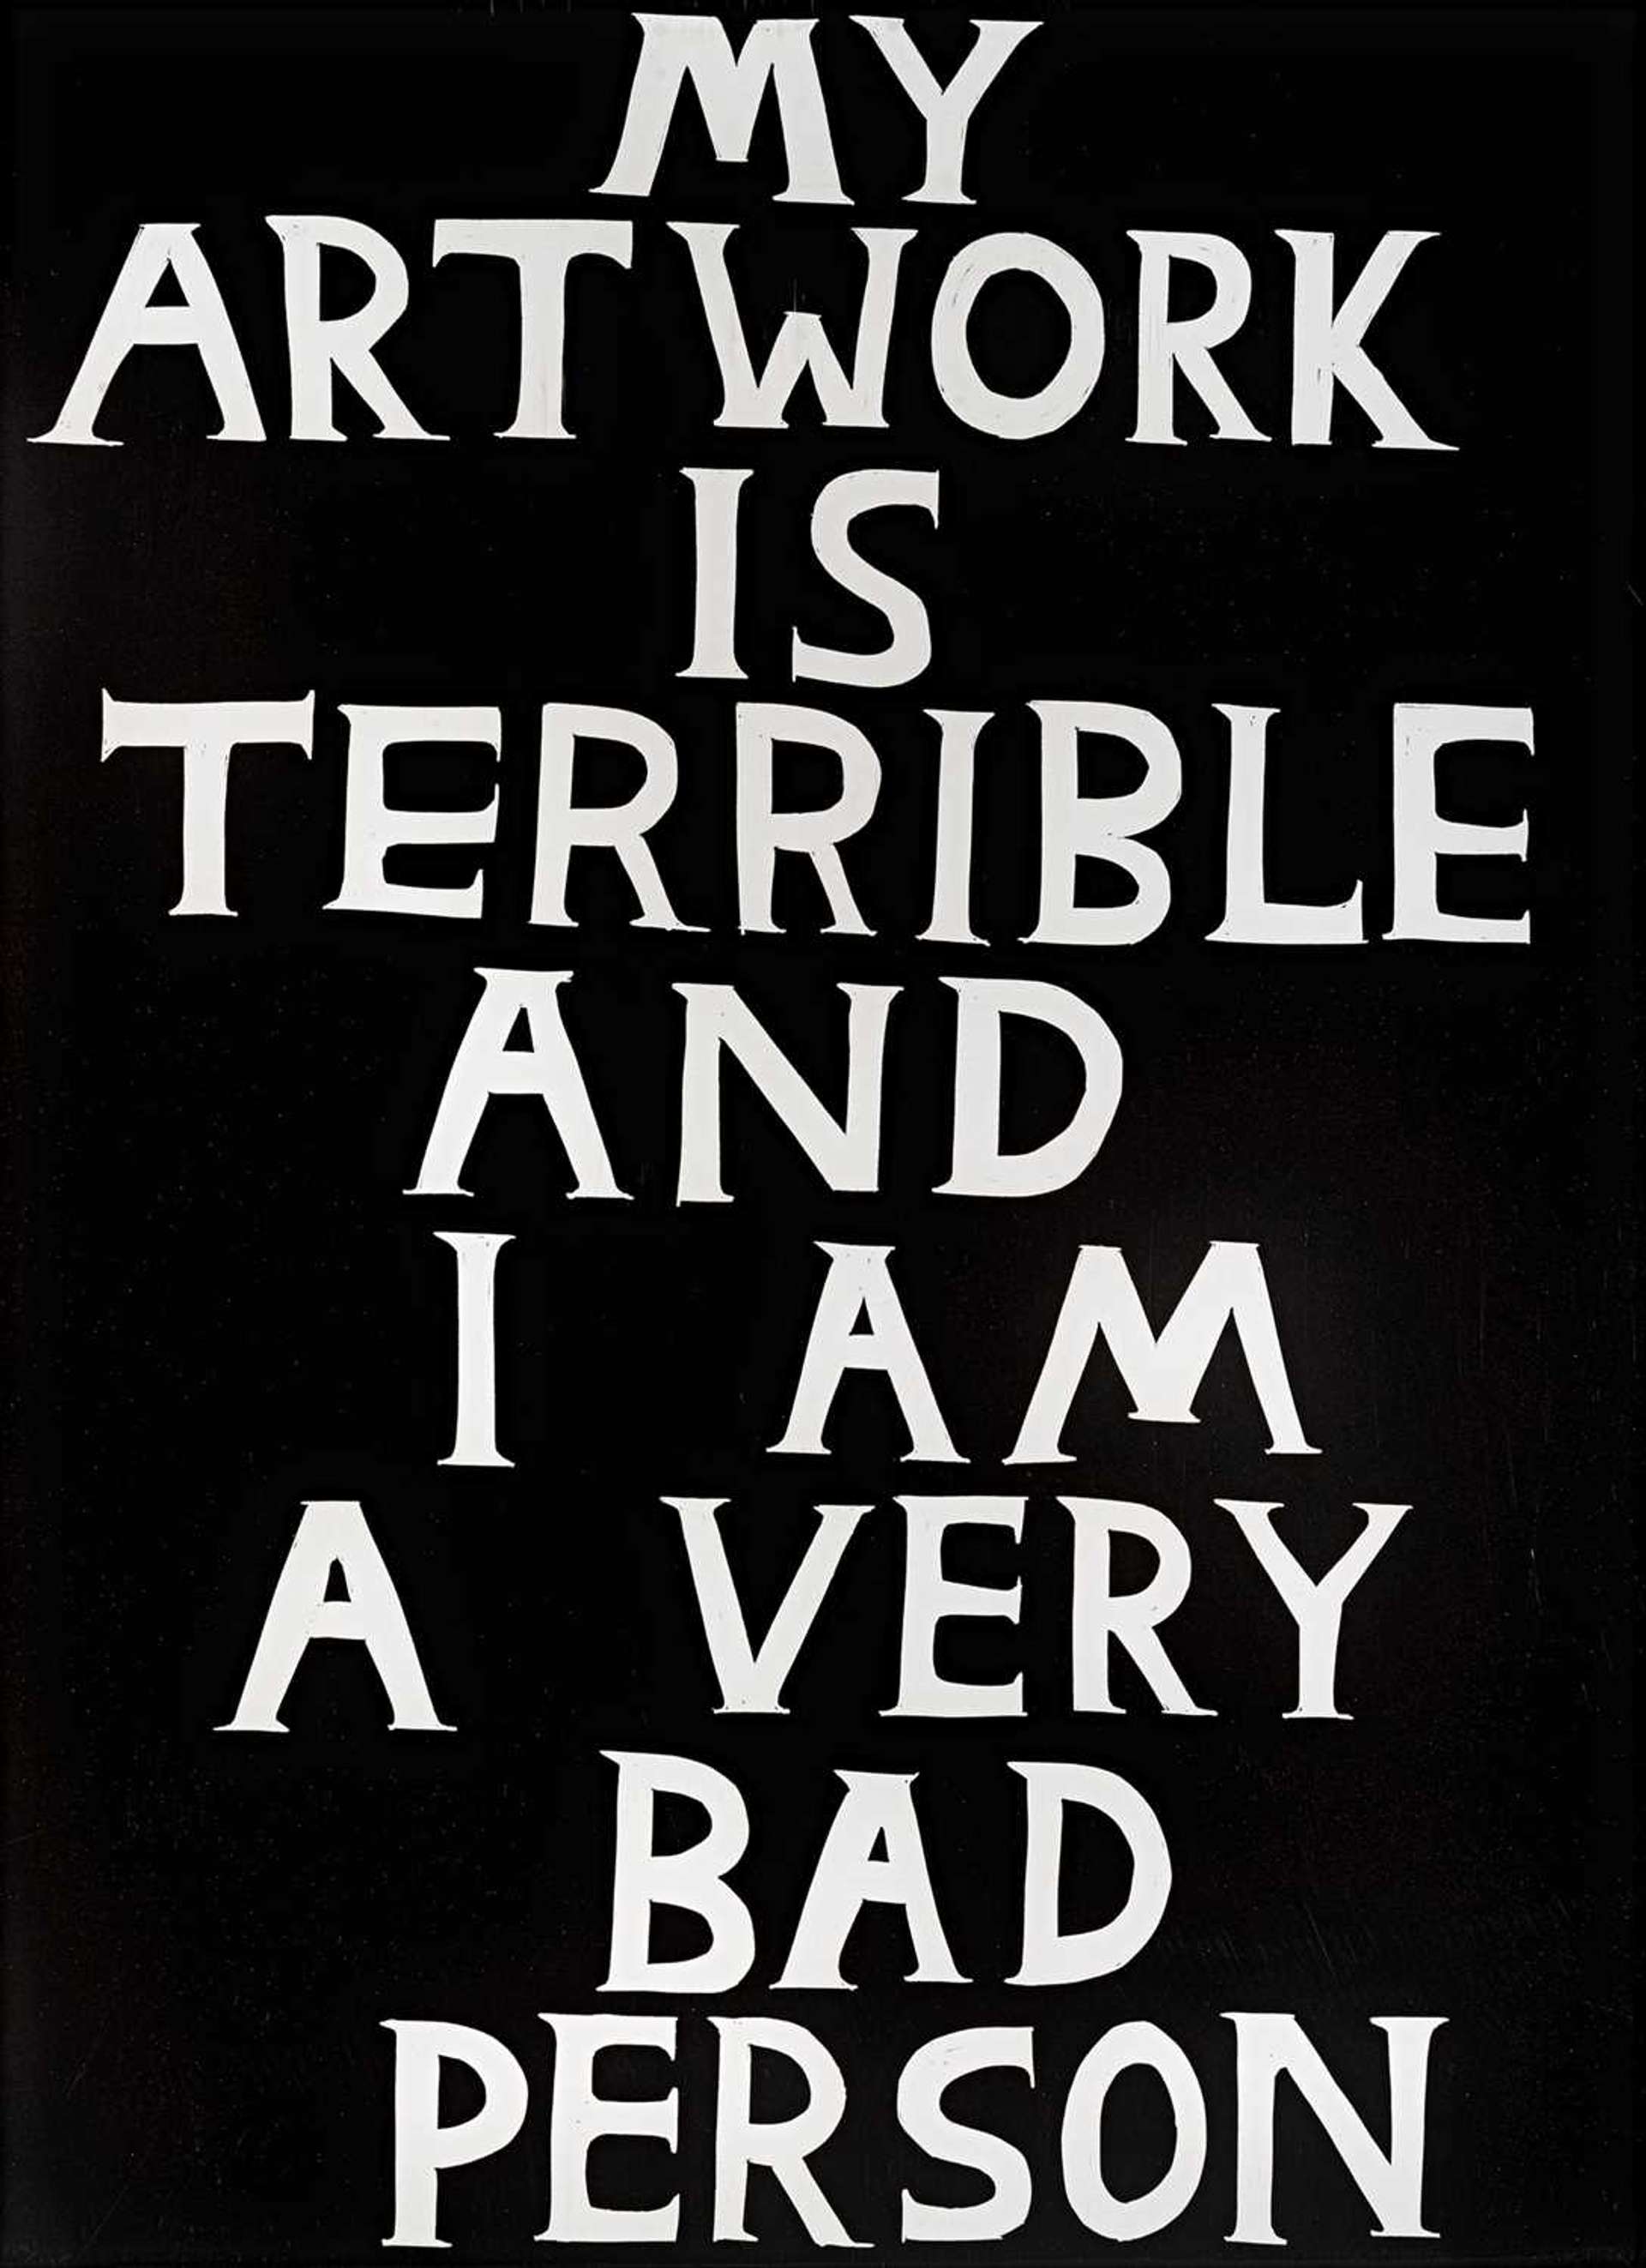 My Artwork Is Terrible by David Shrigley